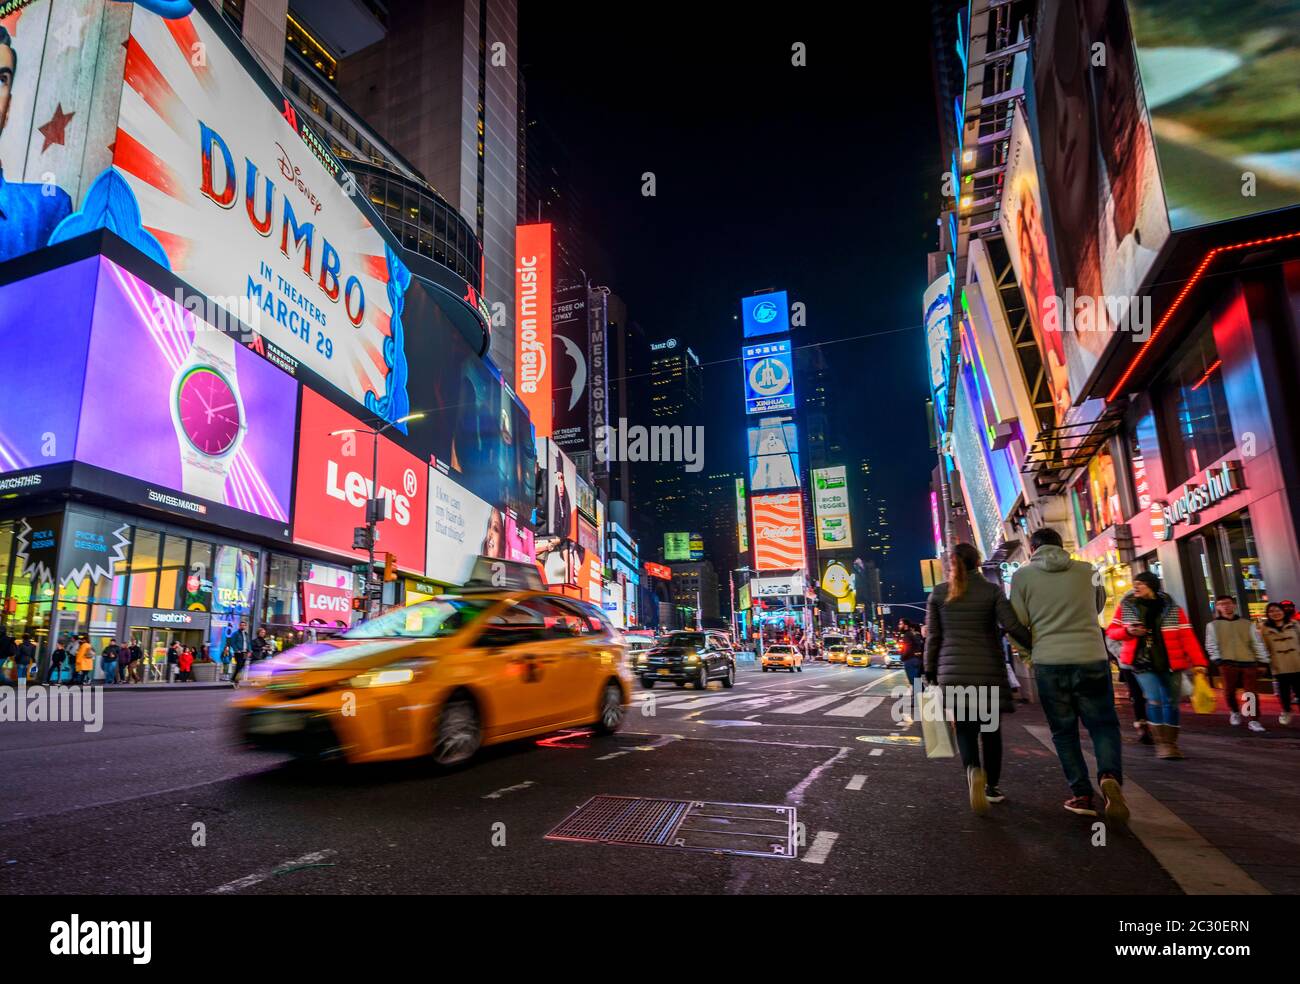 Typical yellow taxi at Times Square at night, Midtown Manhattan, New York City, New York State, USA Stock Photo